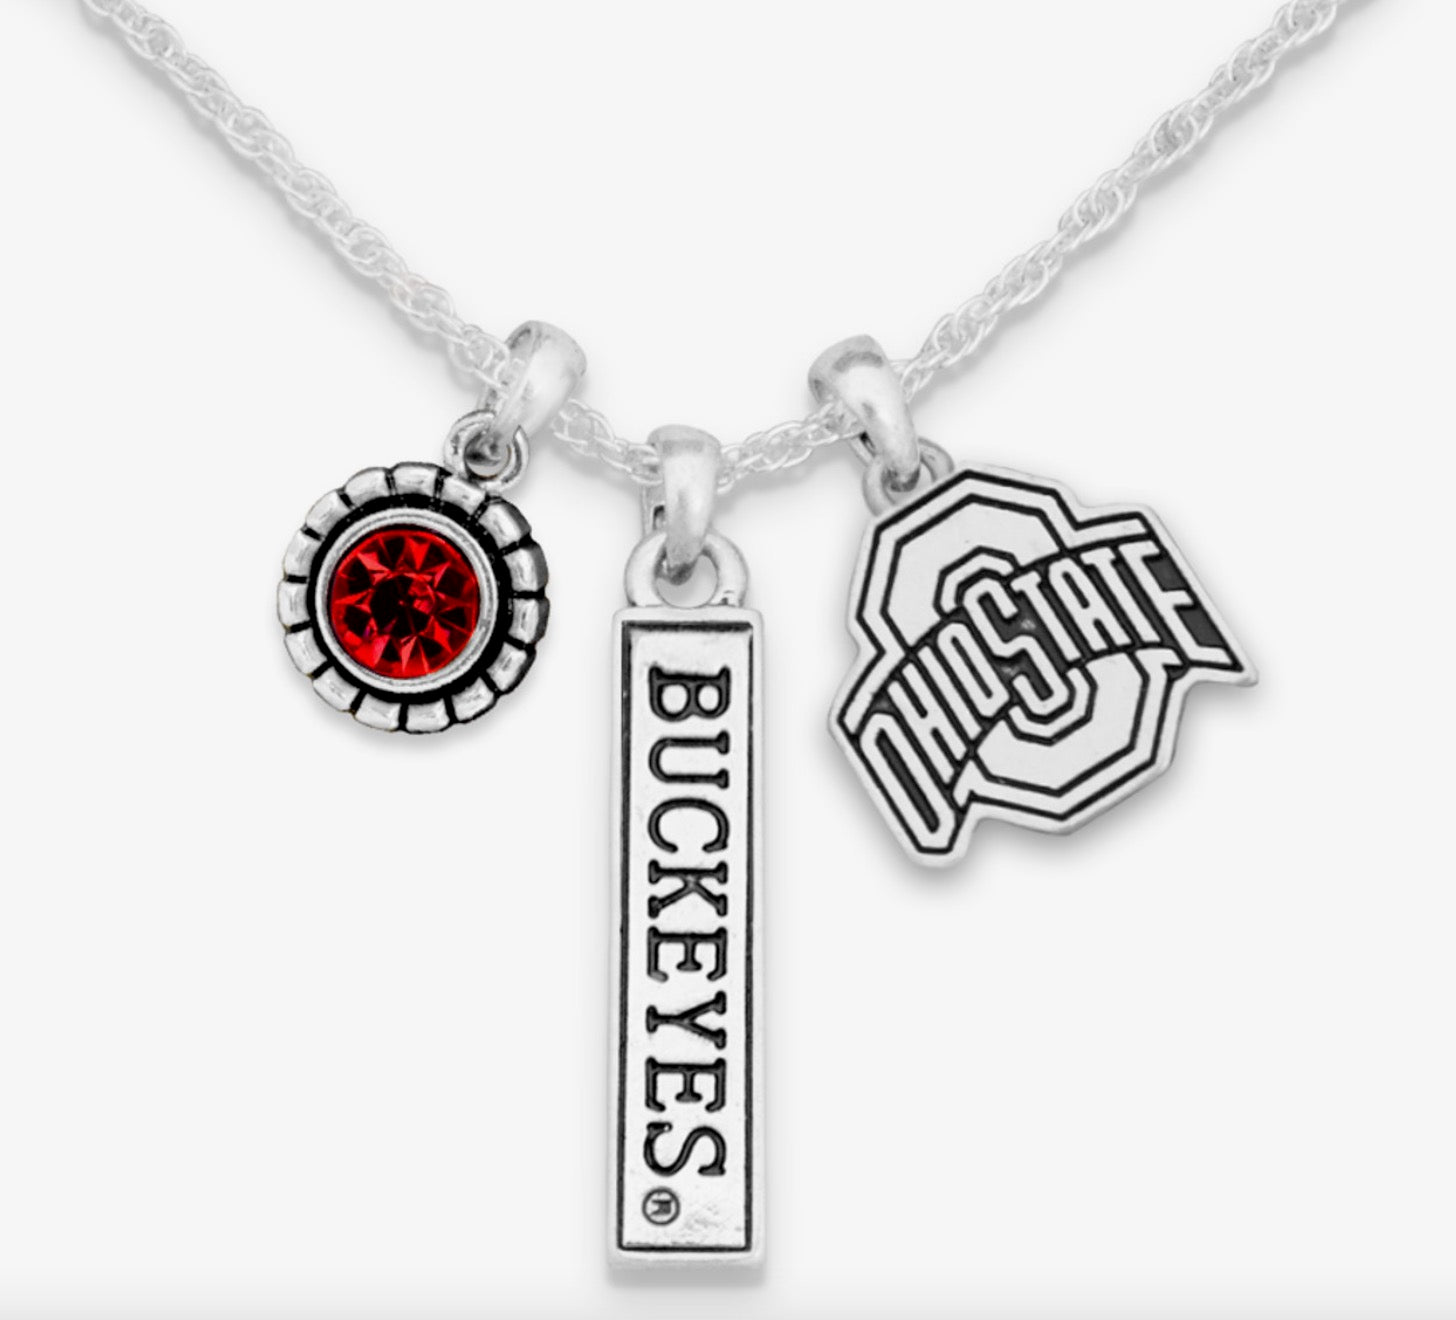 Ohio State Charms | Ohio State Gray Block O with Crystal Charms |  Officially Licensed Ohio State Jewelry | OSU Gifts | Ohio State Jewelry |  OSU Charms